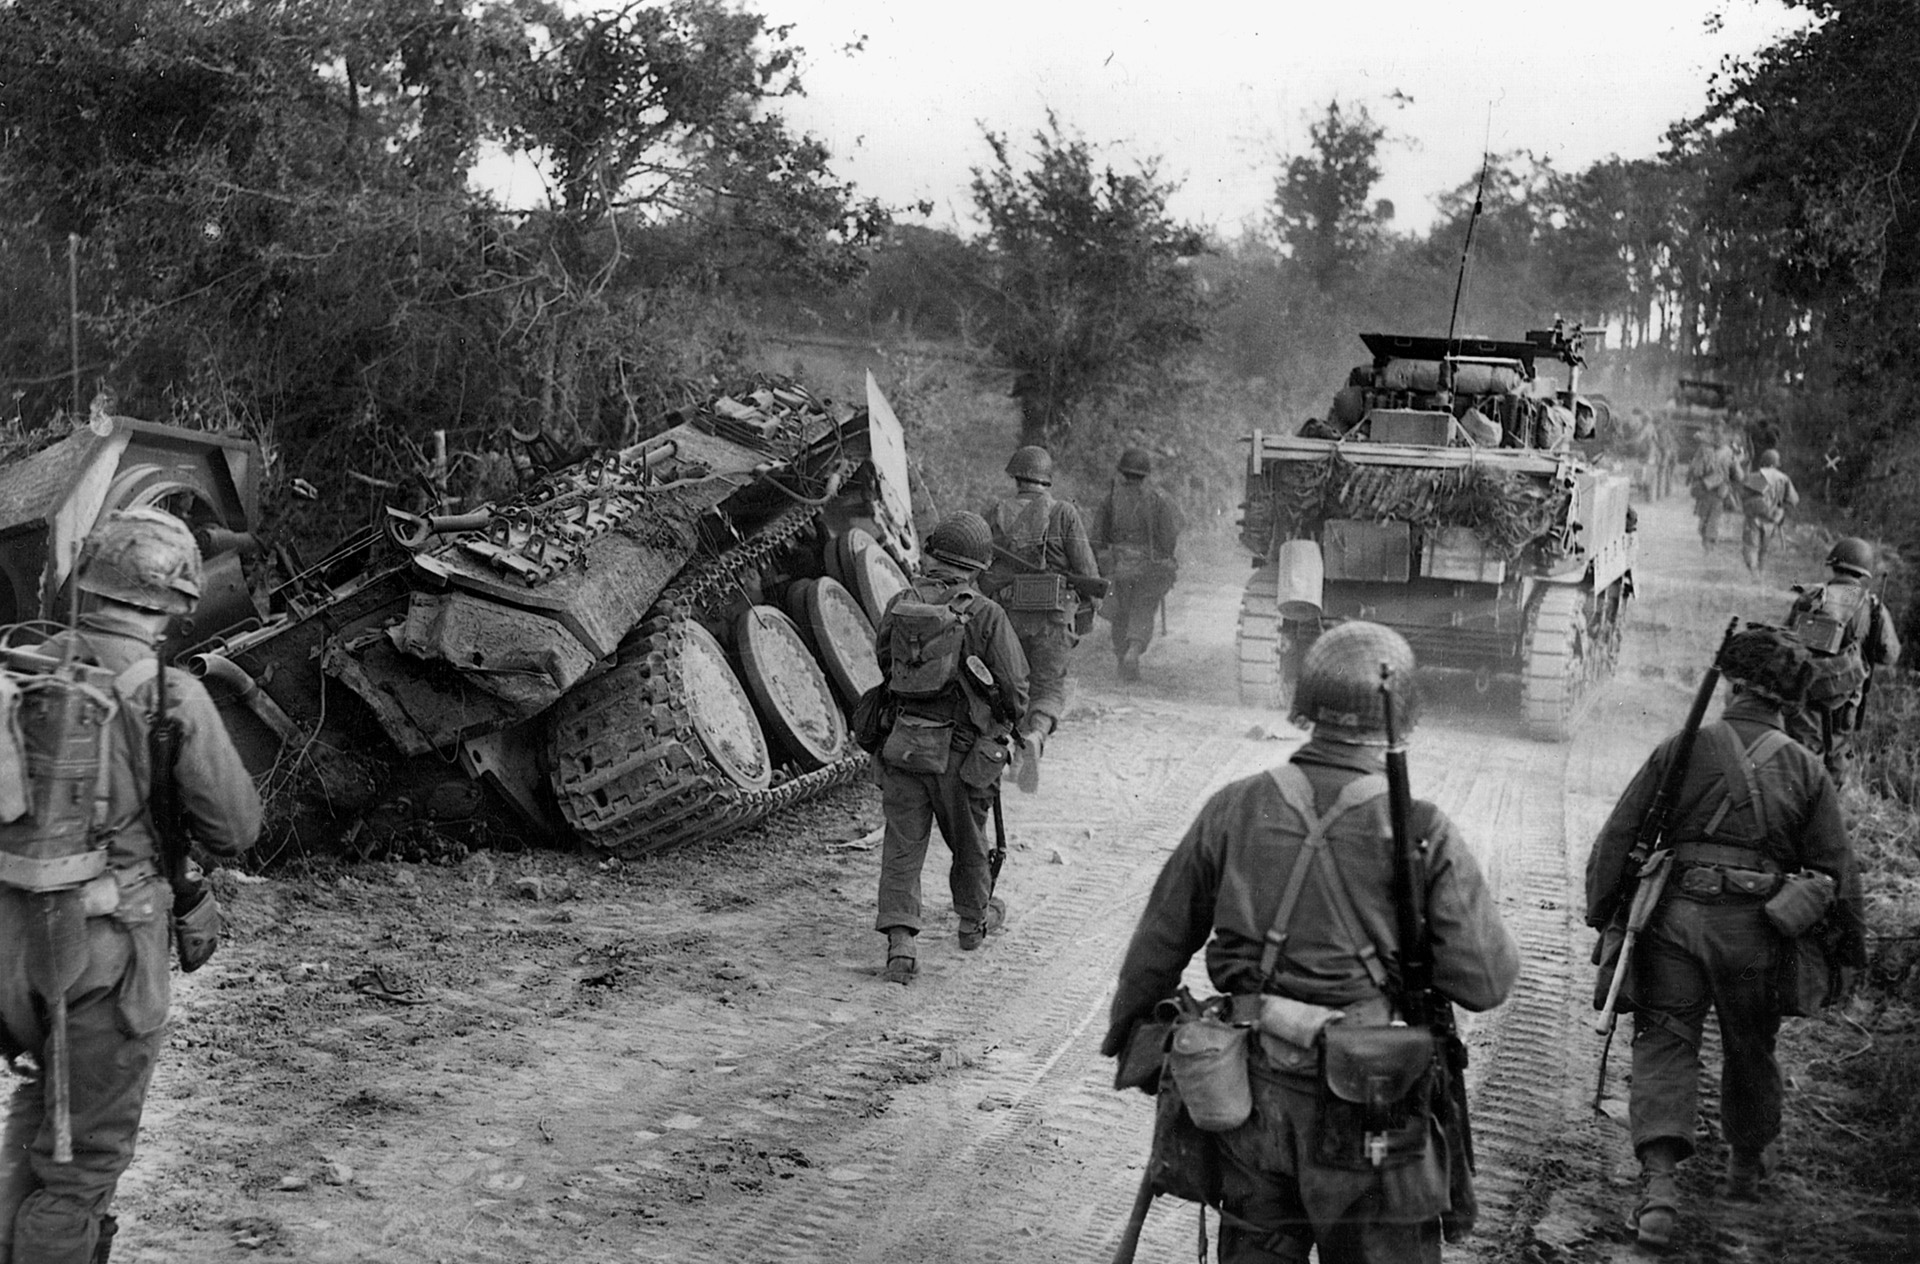 American footsoldiers and armor pass a destroyed panzer. Cobra was marked by lightning advances that made George Patton and Third Army household names in America.